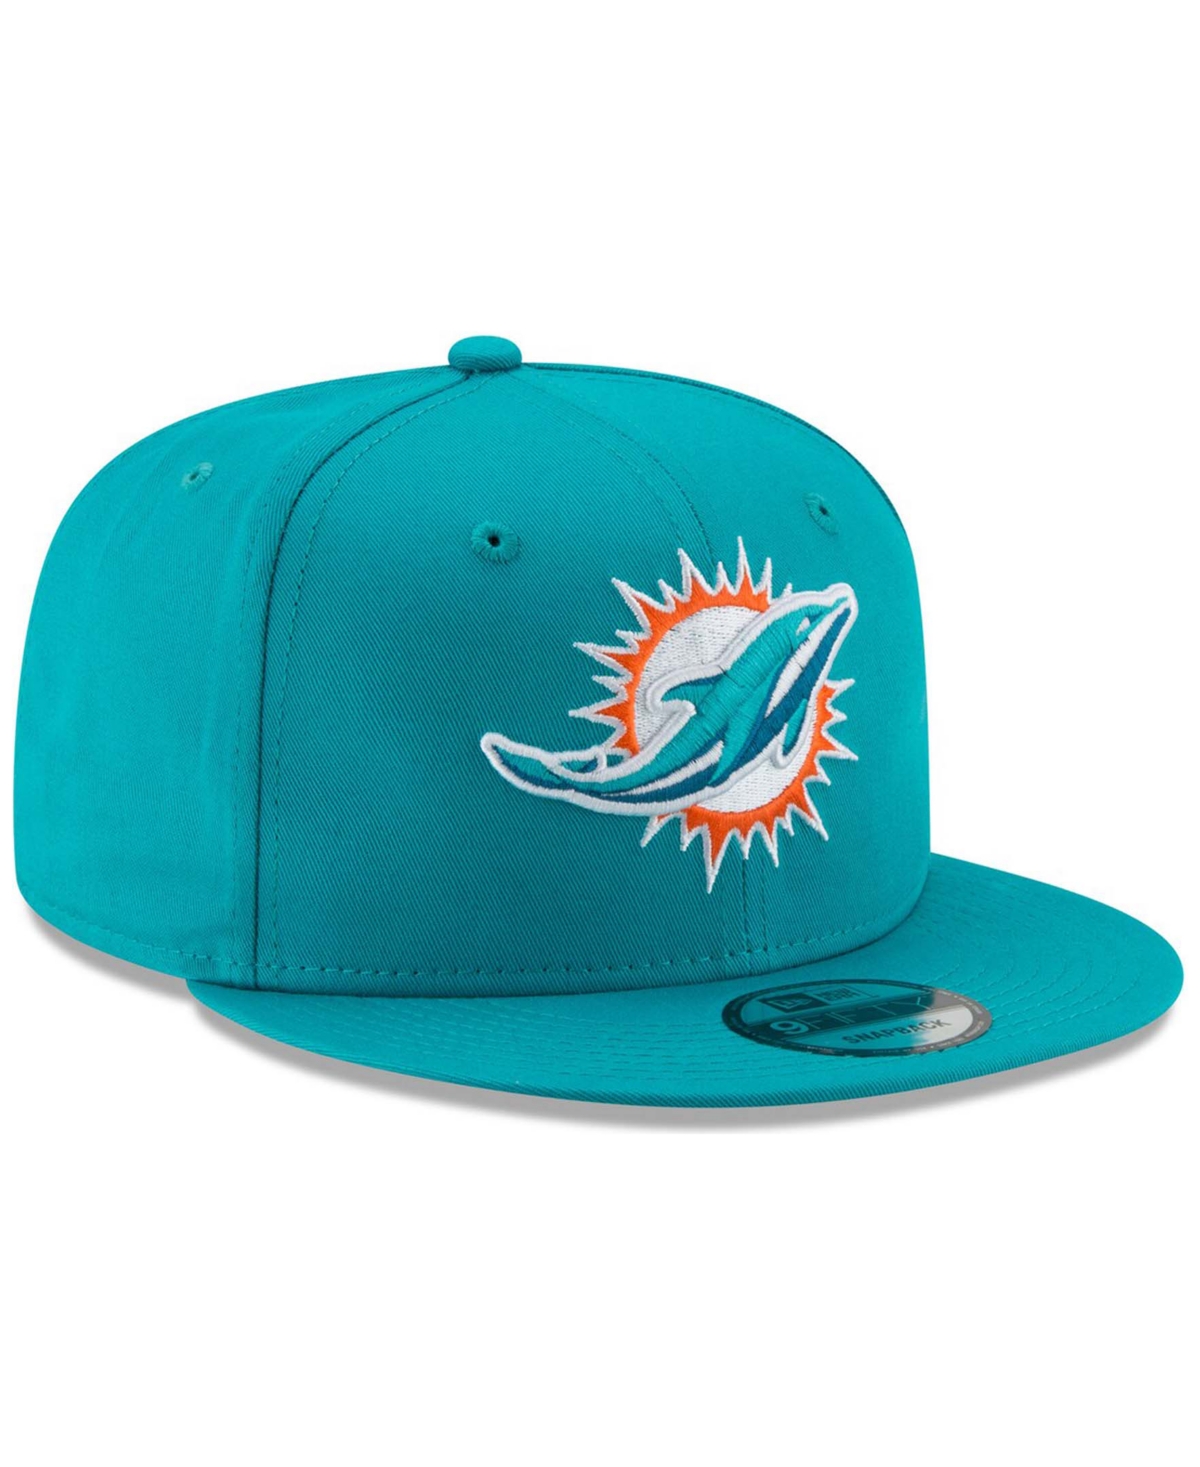 Shop New Era Men's Miami Dolphins Basic 9fifty Adjustable Snapback Cap In Turquoise